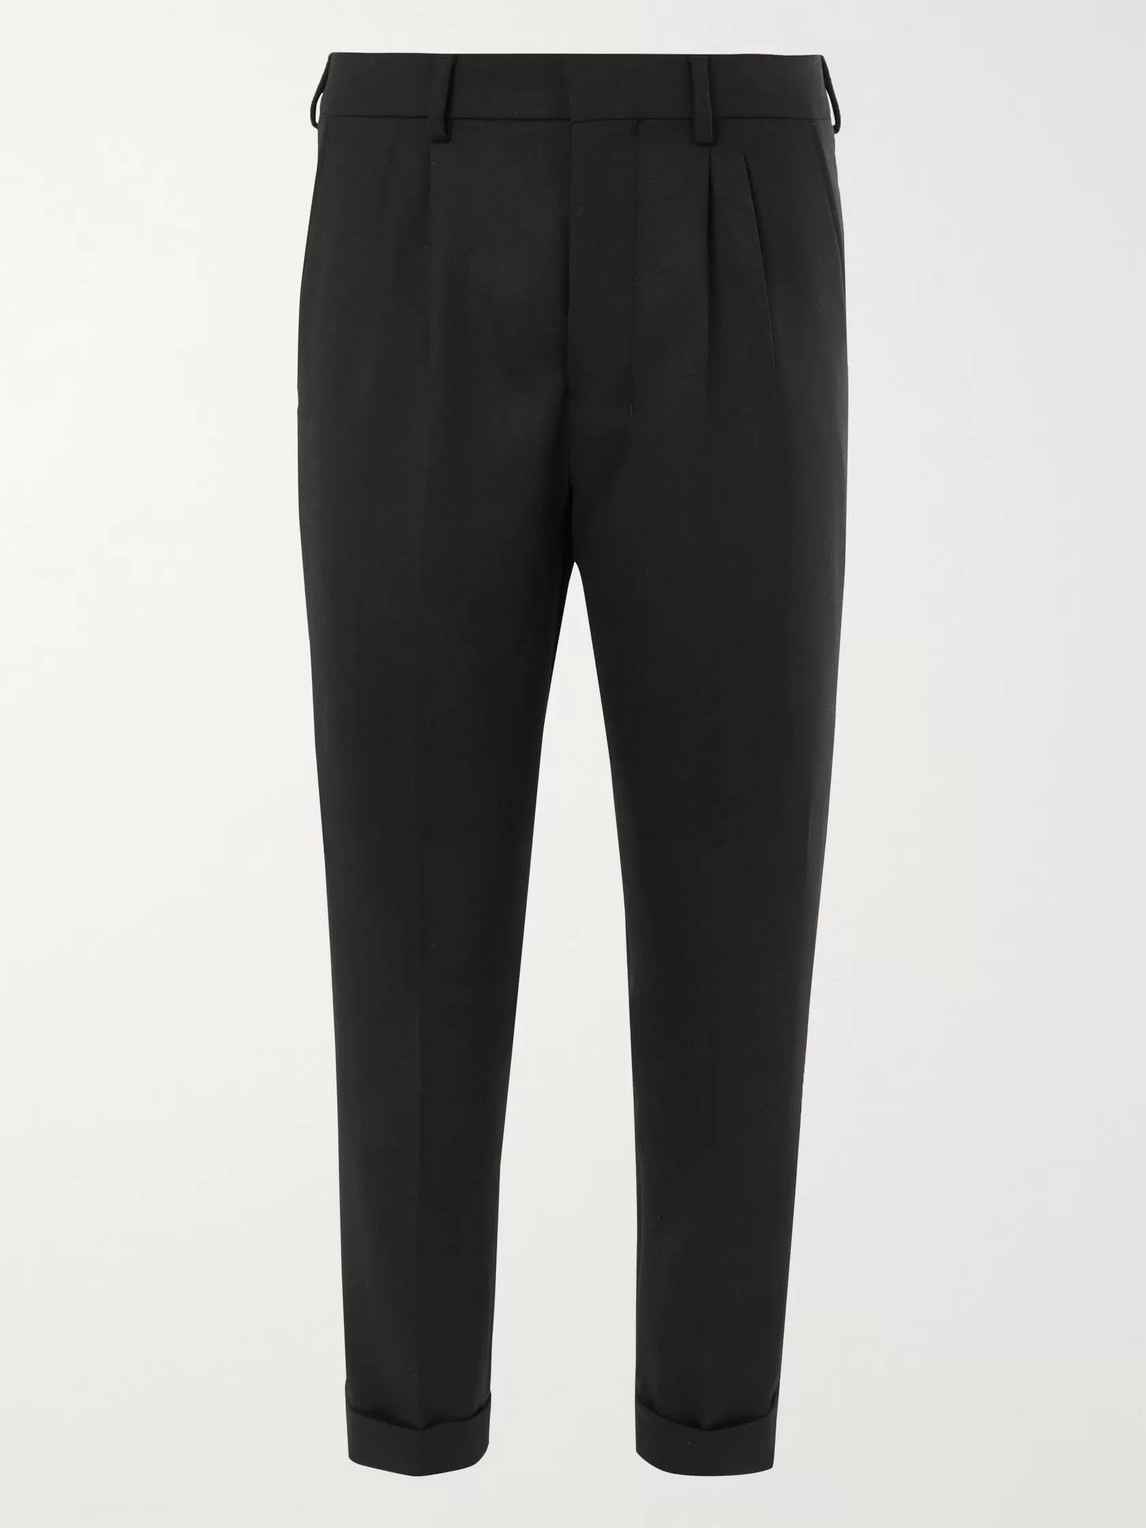 Ami Alexandre Mattiussi Black Cropped Tapered Pleated Flannel Trousers